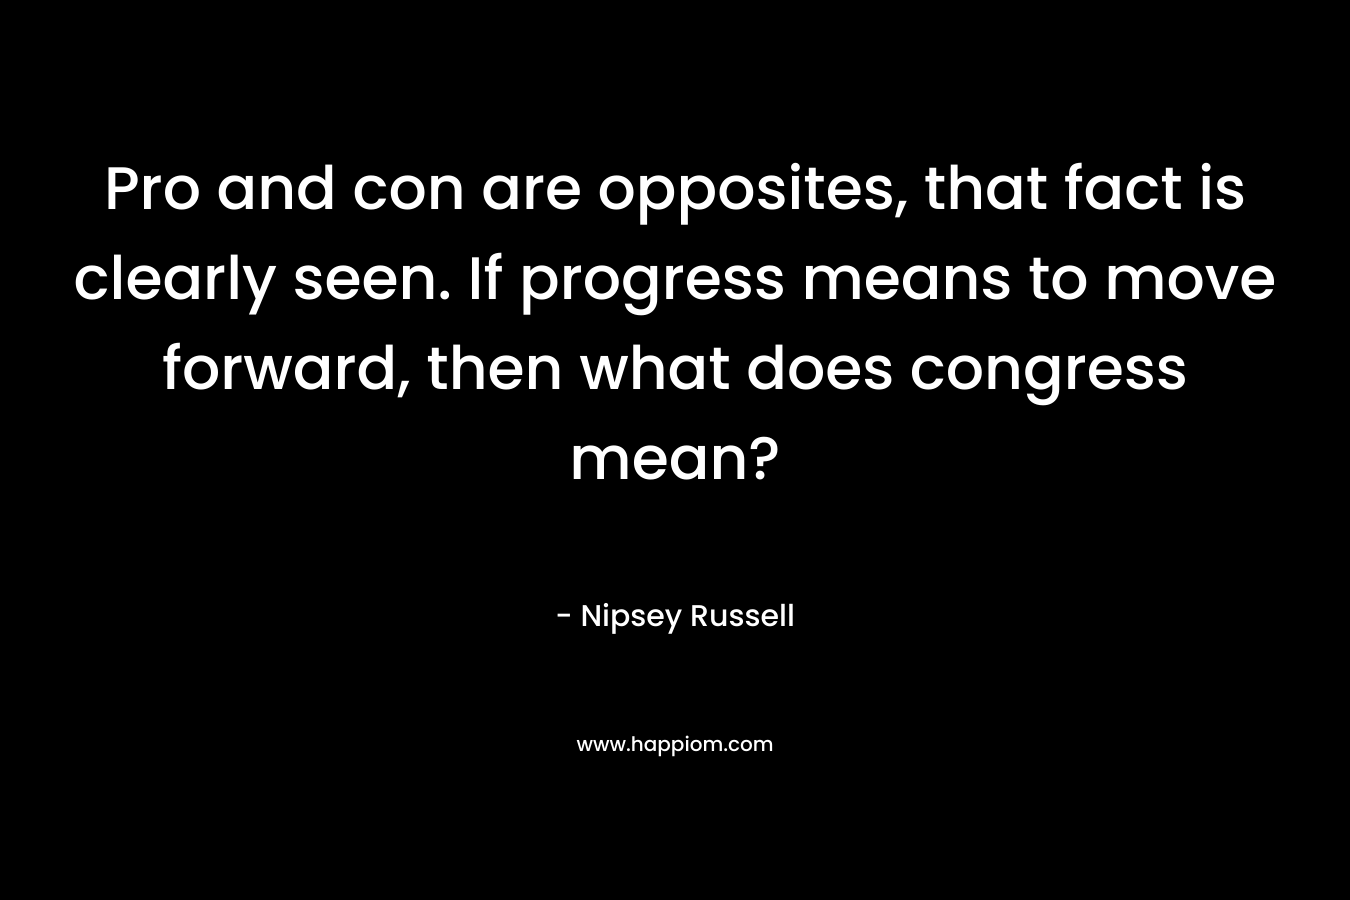 Pro and con are opposites, that fact is clearly seen. If progress means to move forward, then what does congress mean? – Nipsey Russell